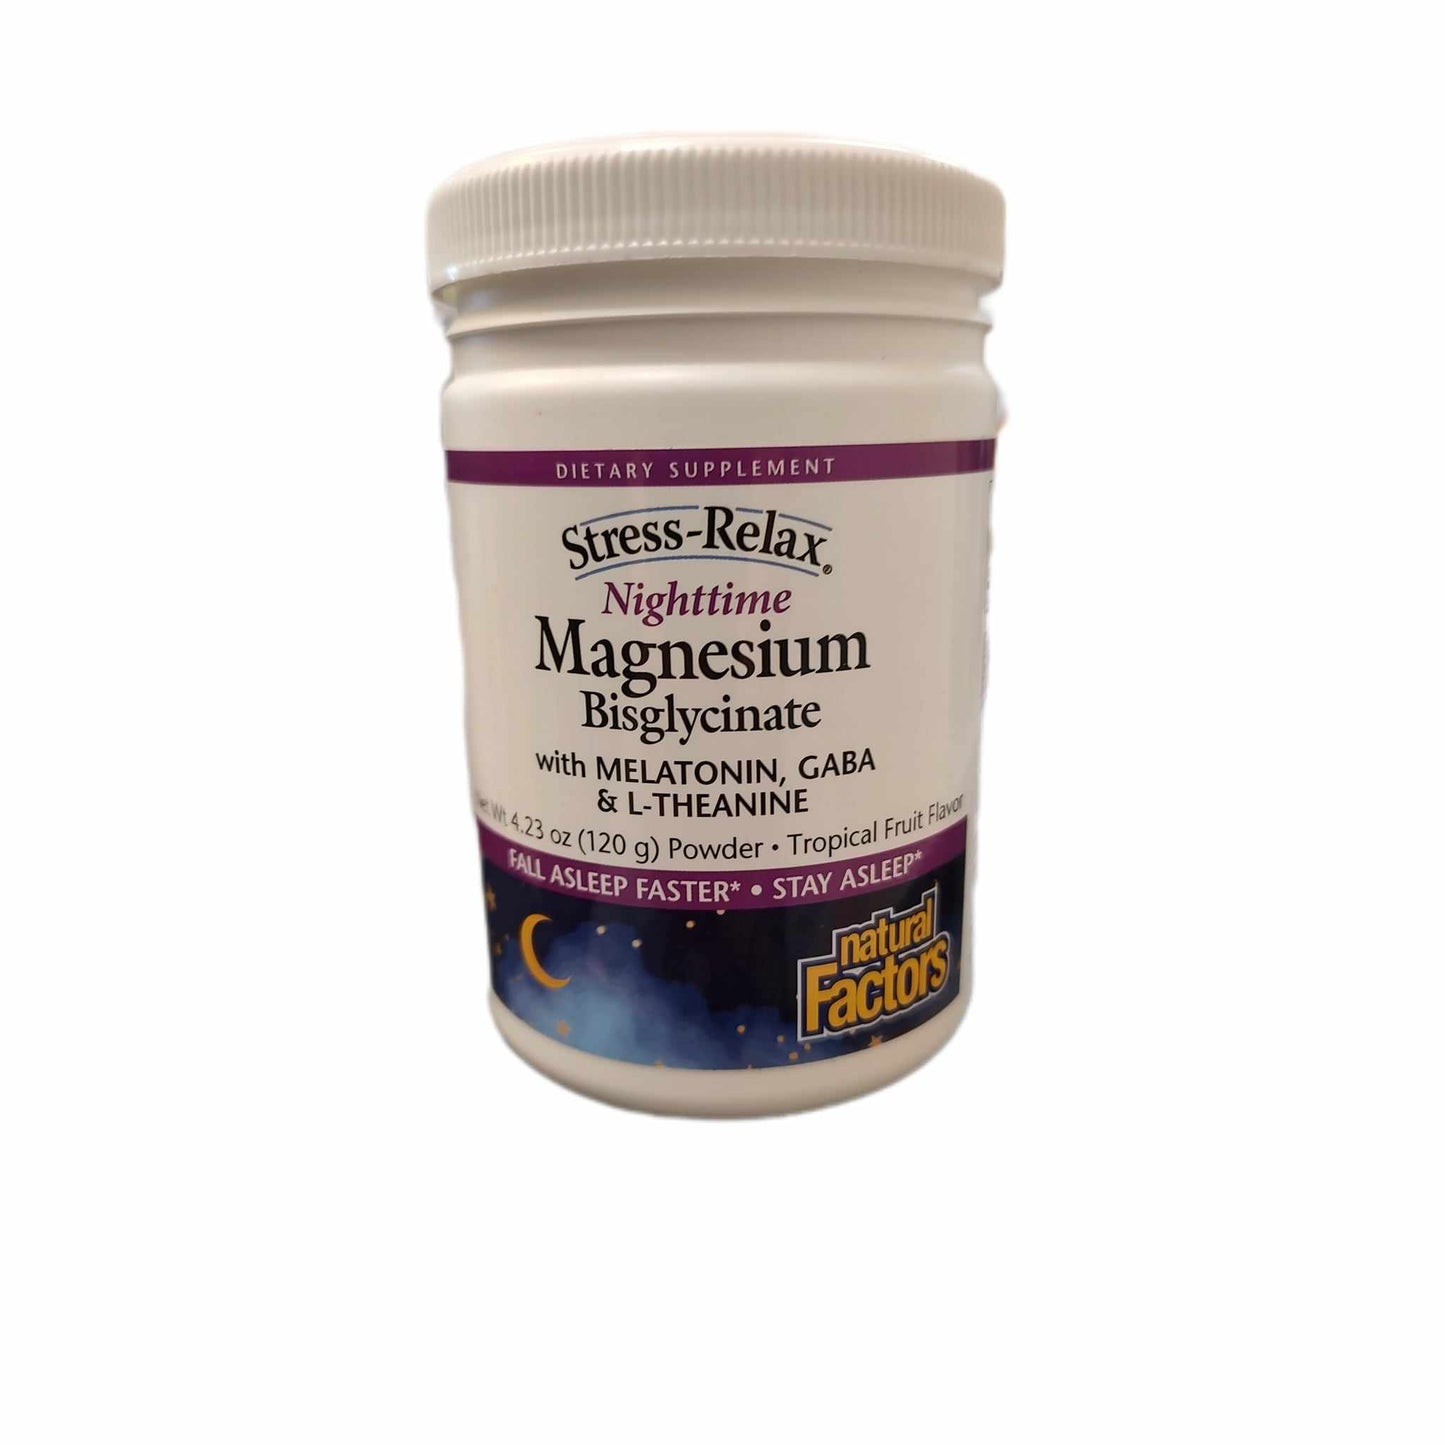 Natural Factors Stress-Relax® Nighttime Magnesium Bisglycinate